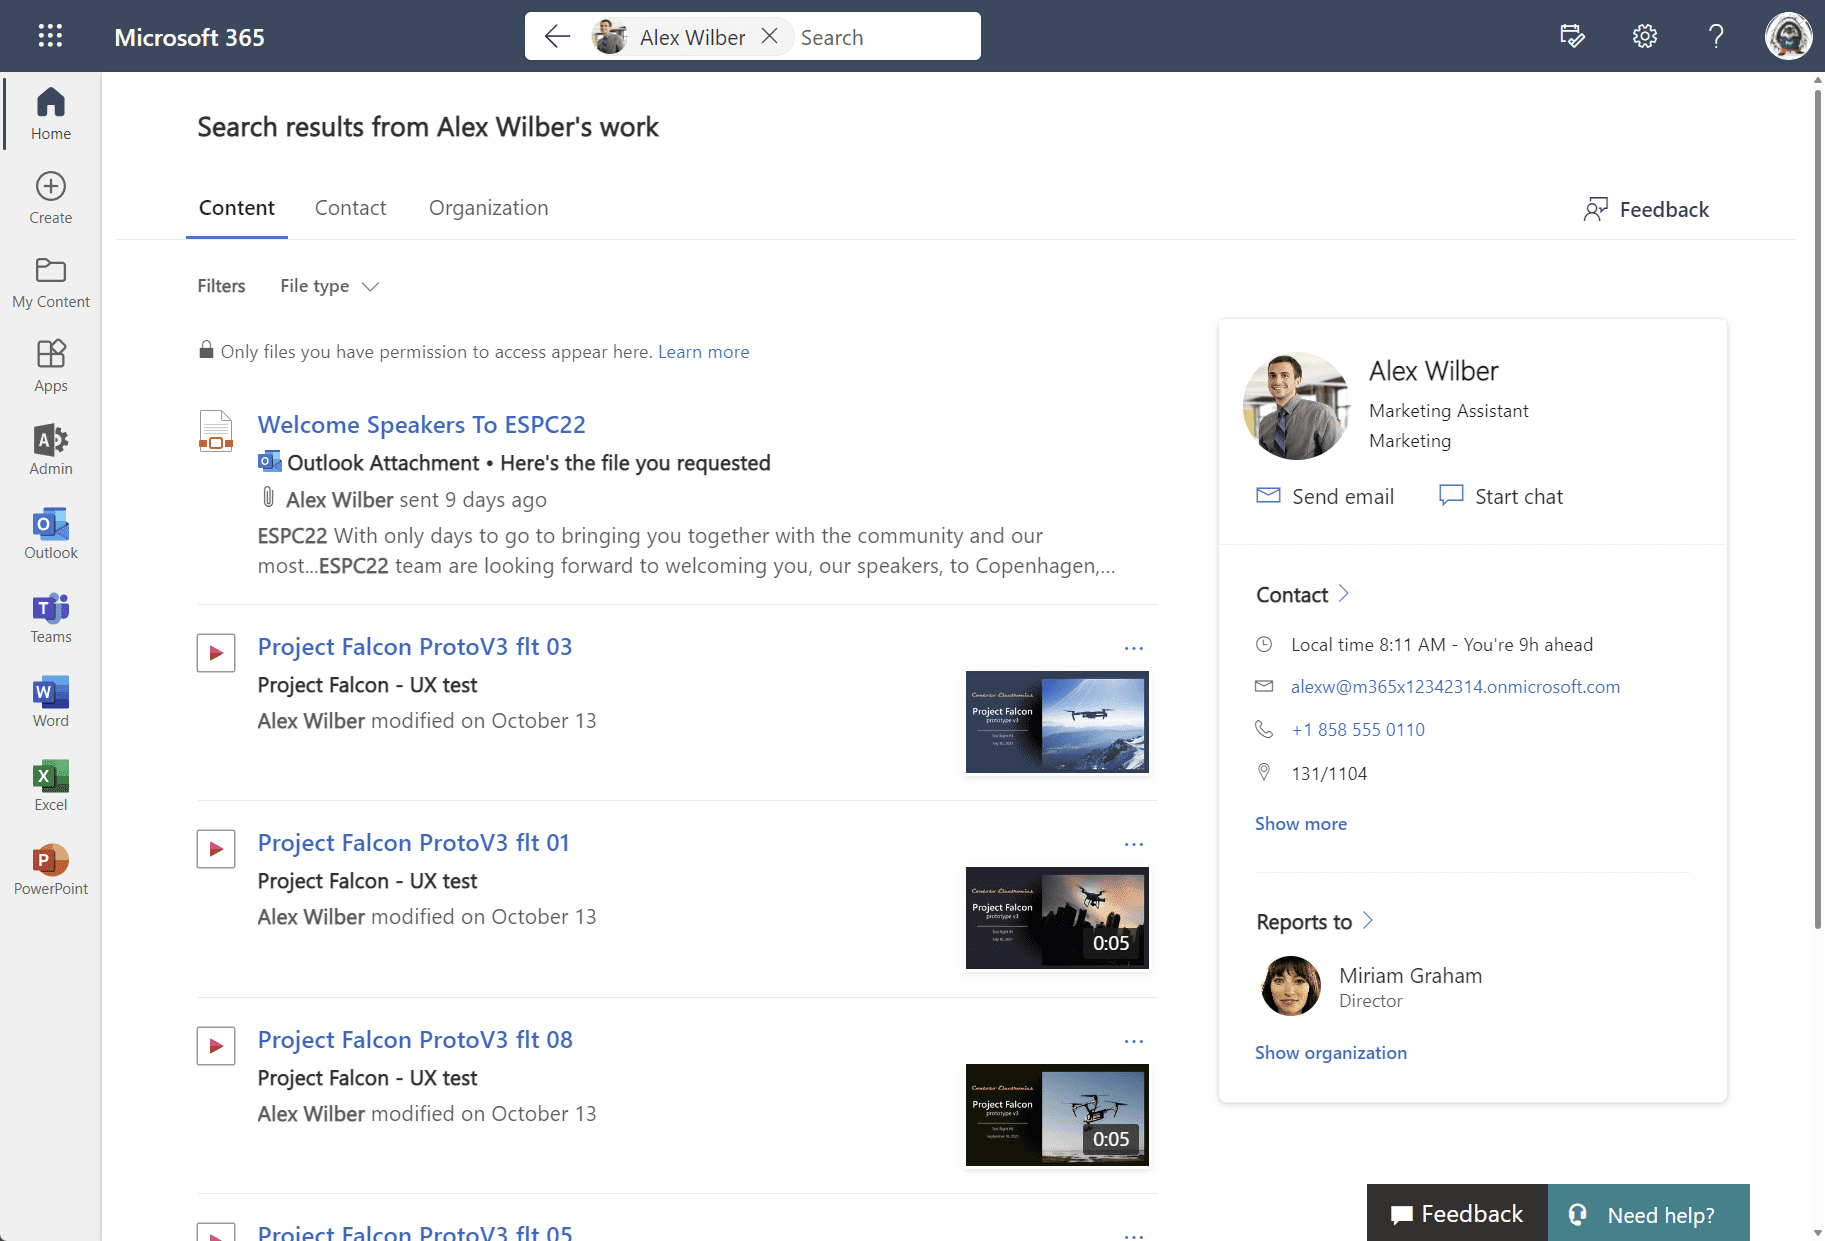 Microsoft Search gets Traditional Outlook attachment search capability